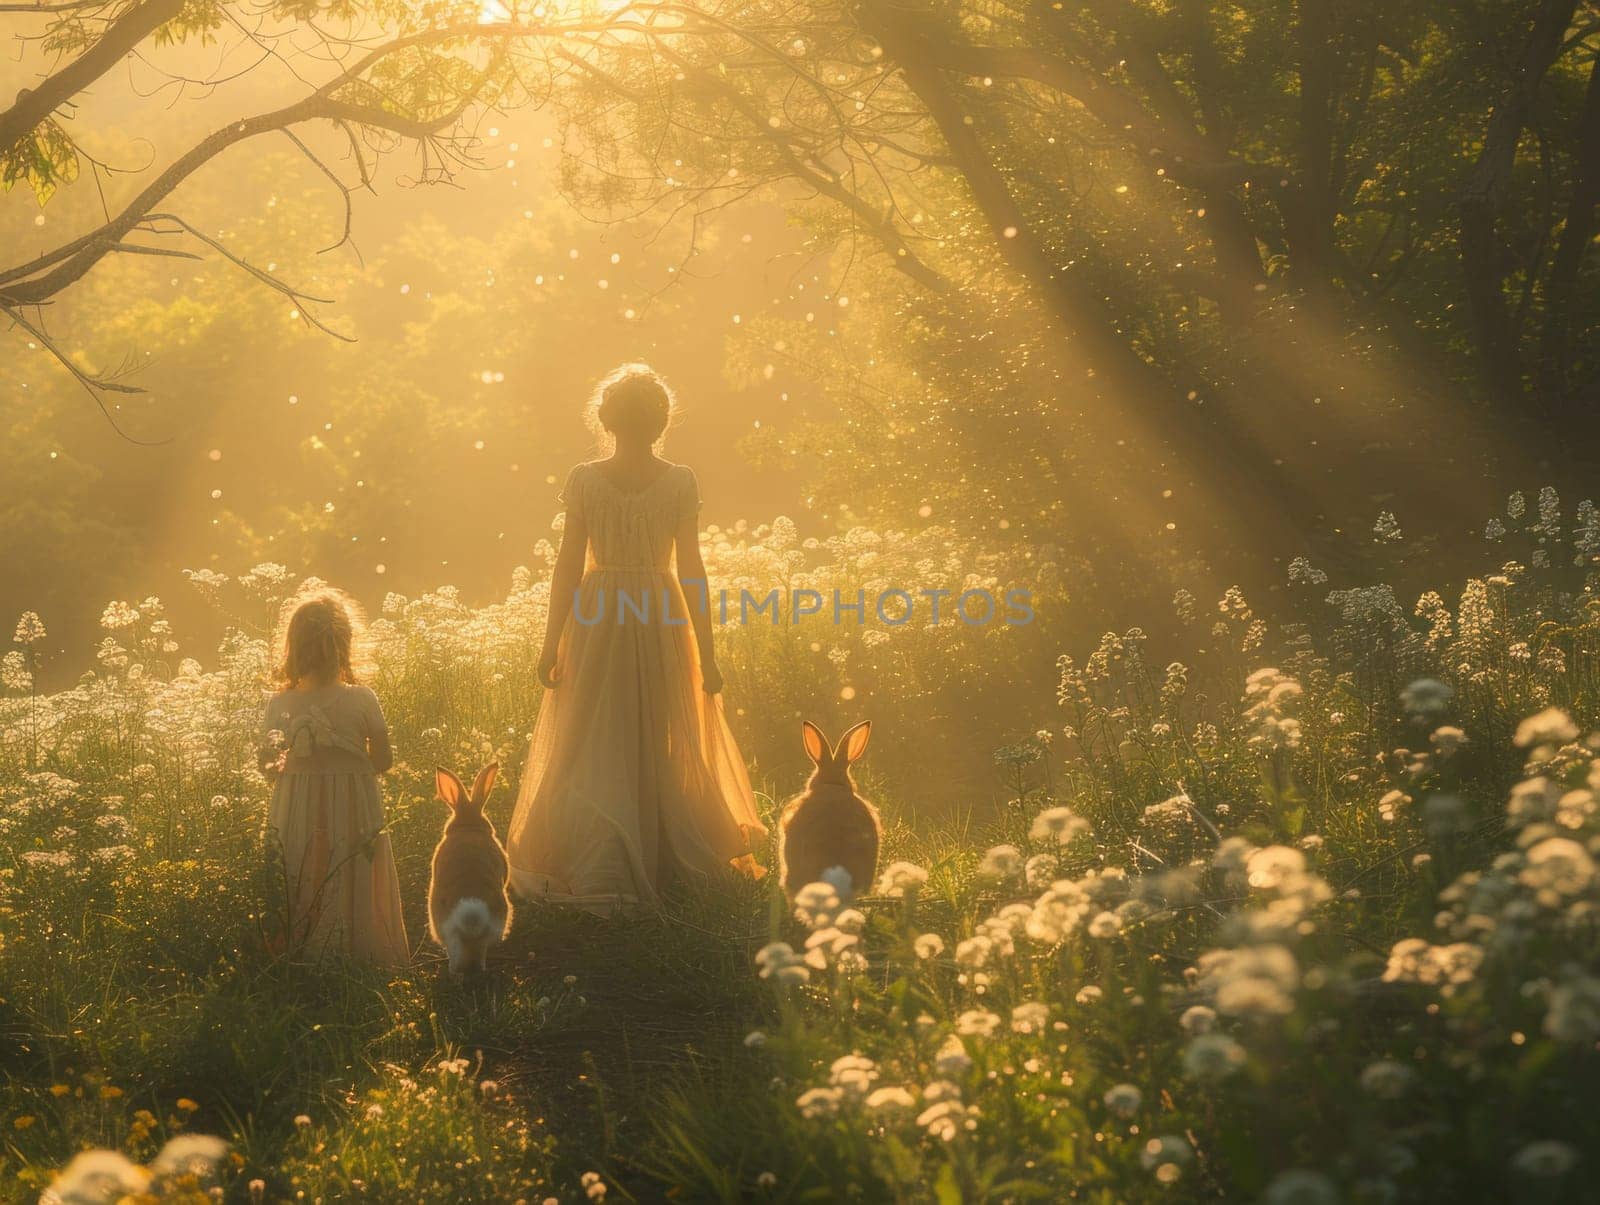 A woman and two children wander through a vibrant field of colorful flowers, under a clear blue sky.